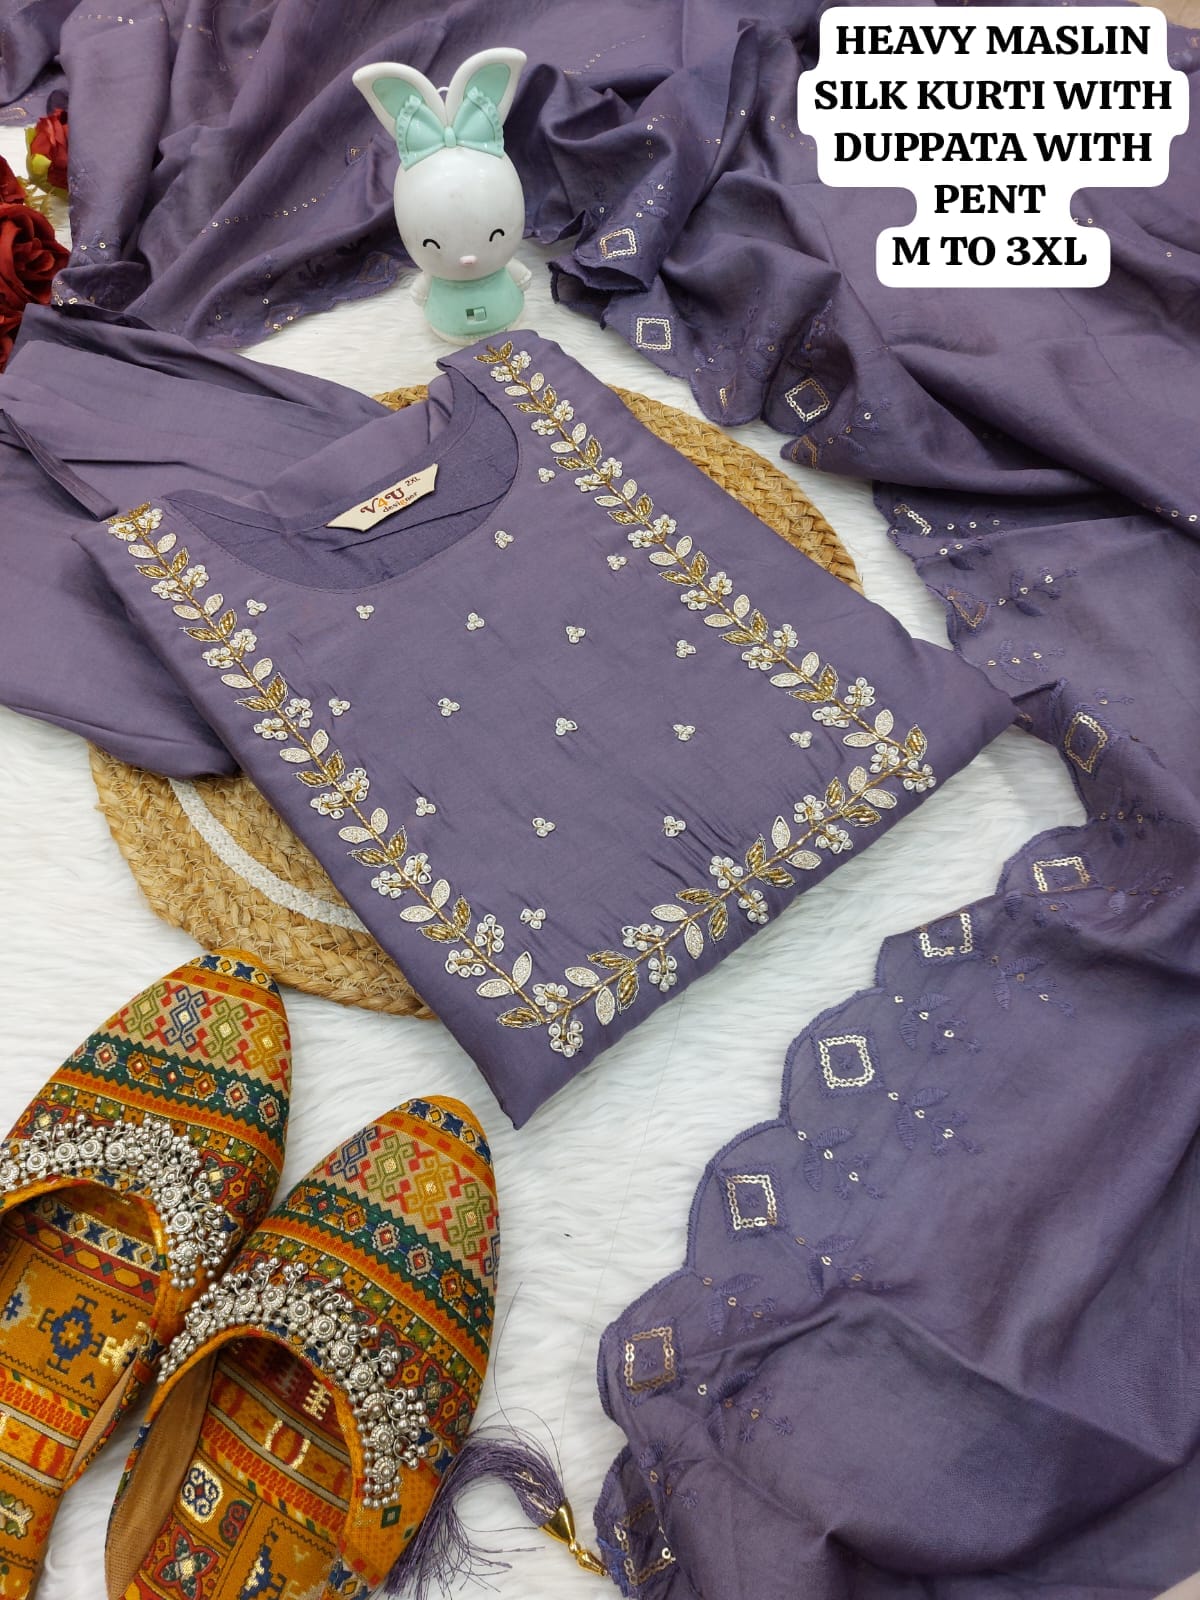 Heavy Maslin silk kurti with duppata with pent 